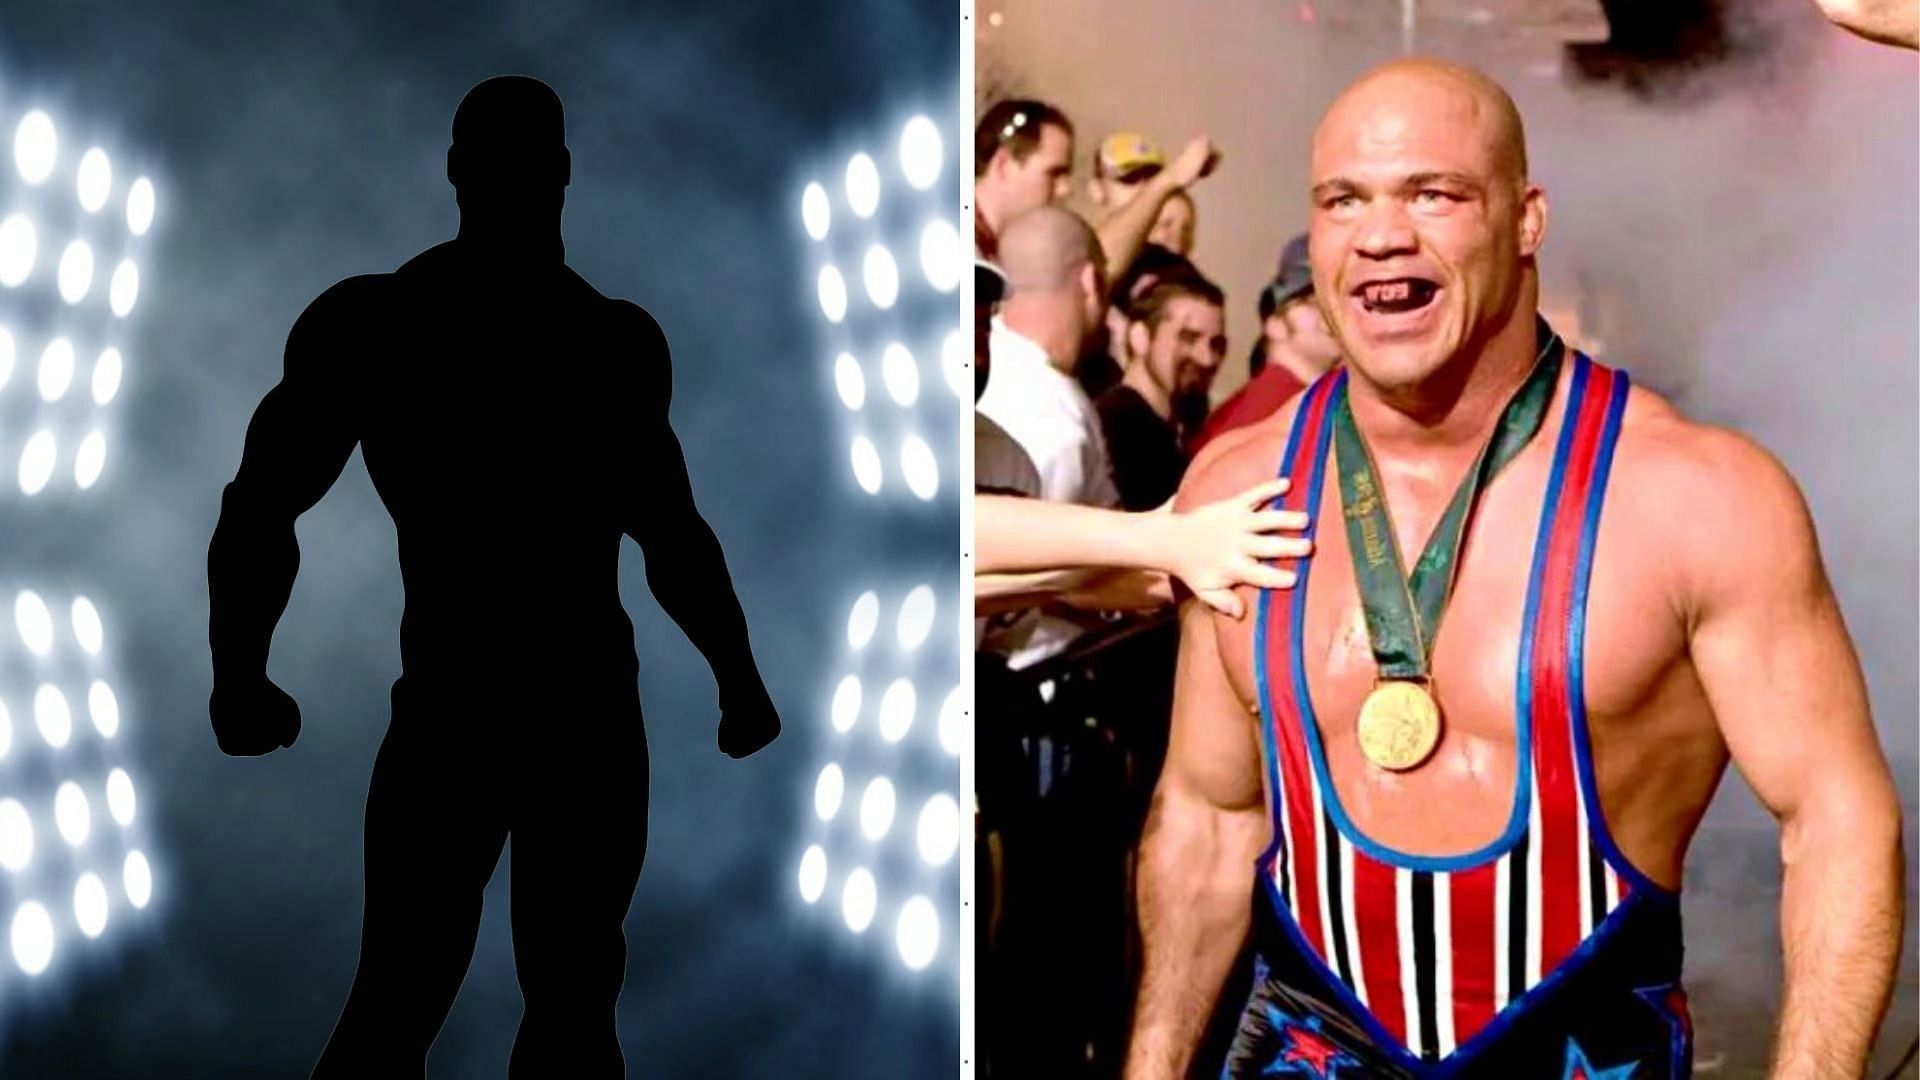 Paul Virk wants to see Kurt Angle and Bobby Lashley in IMPACT Wrestling